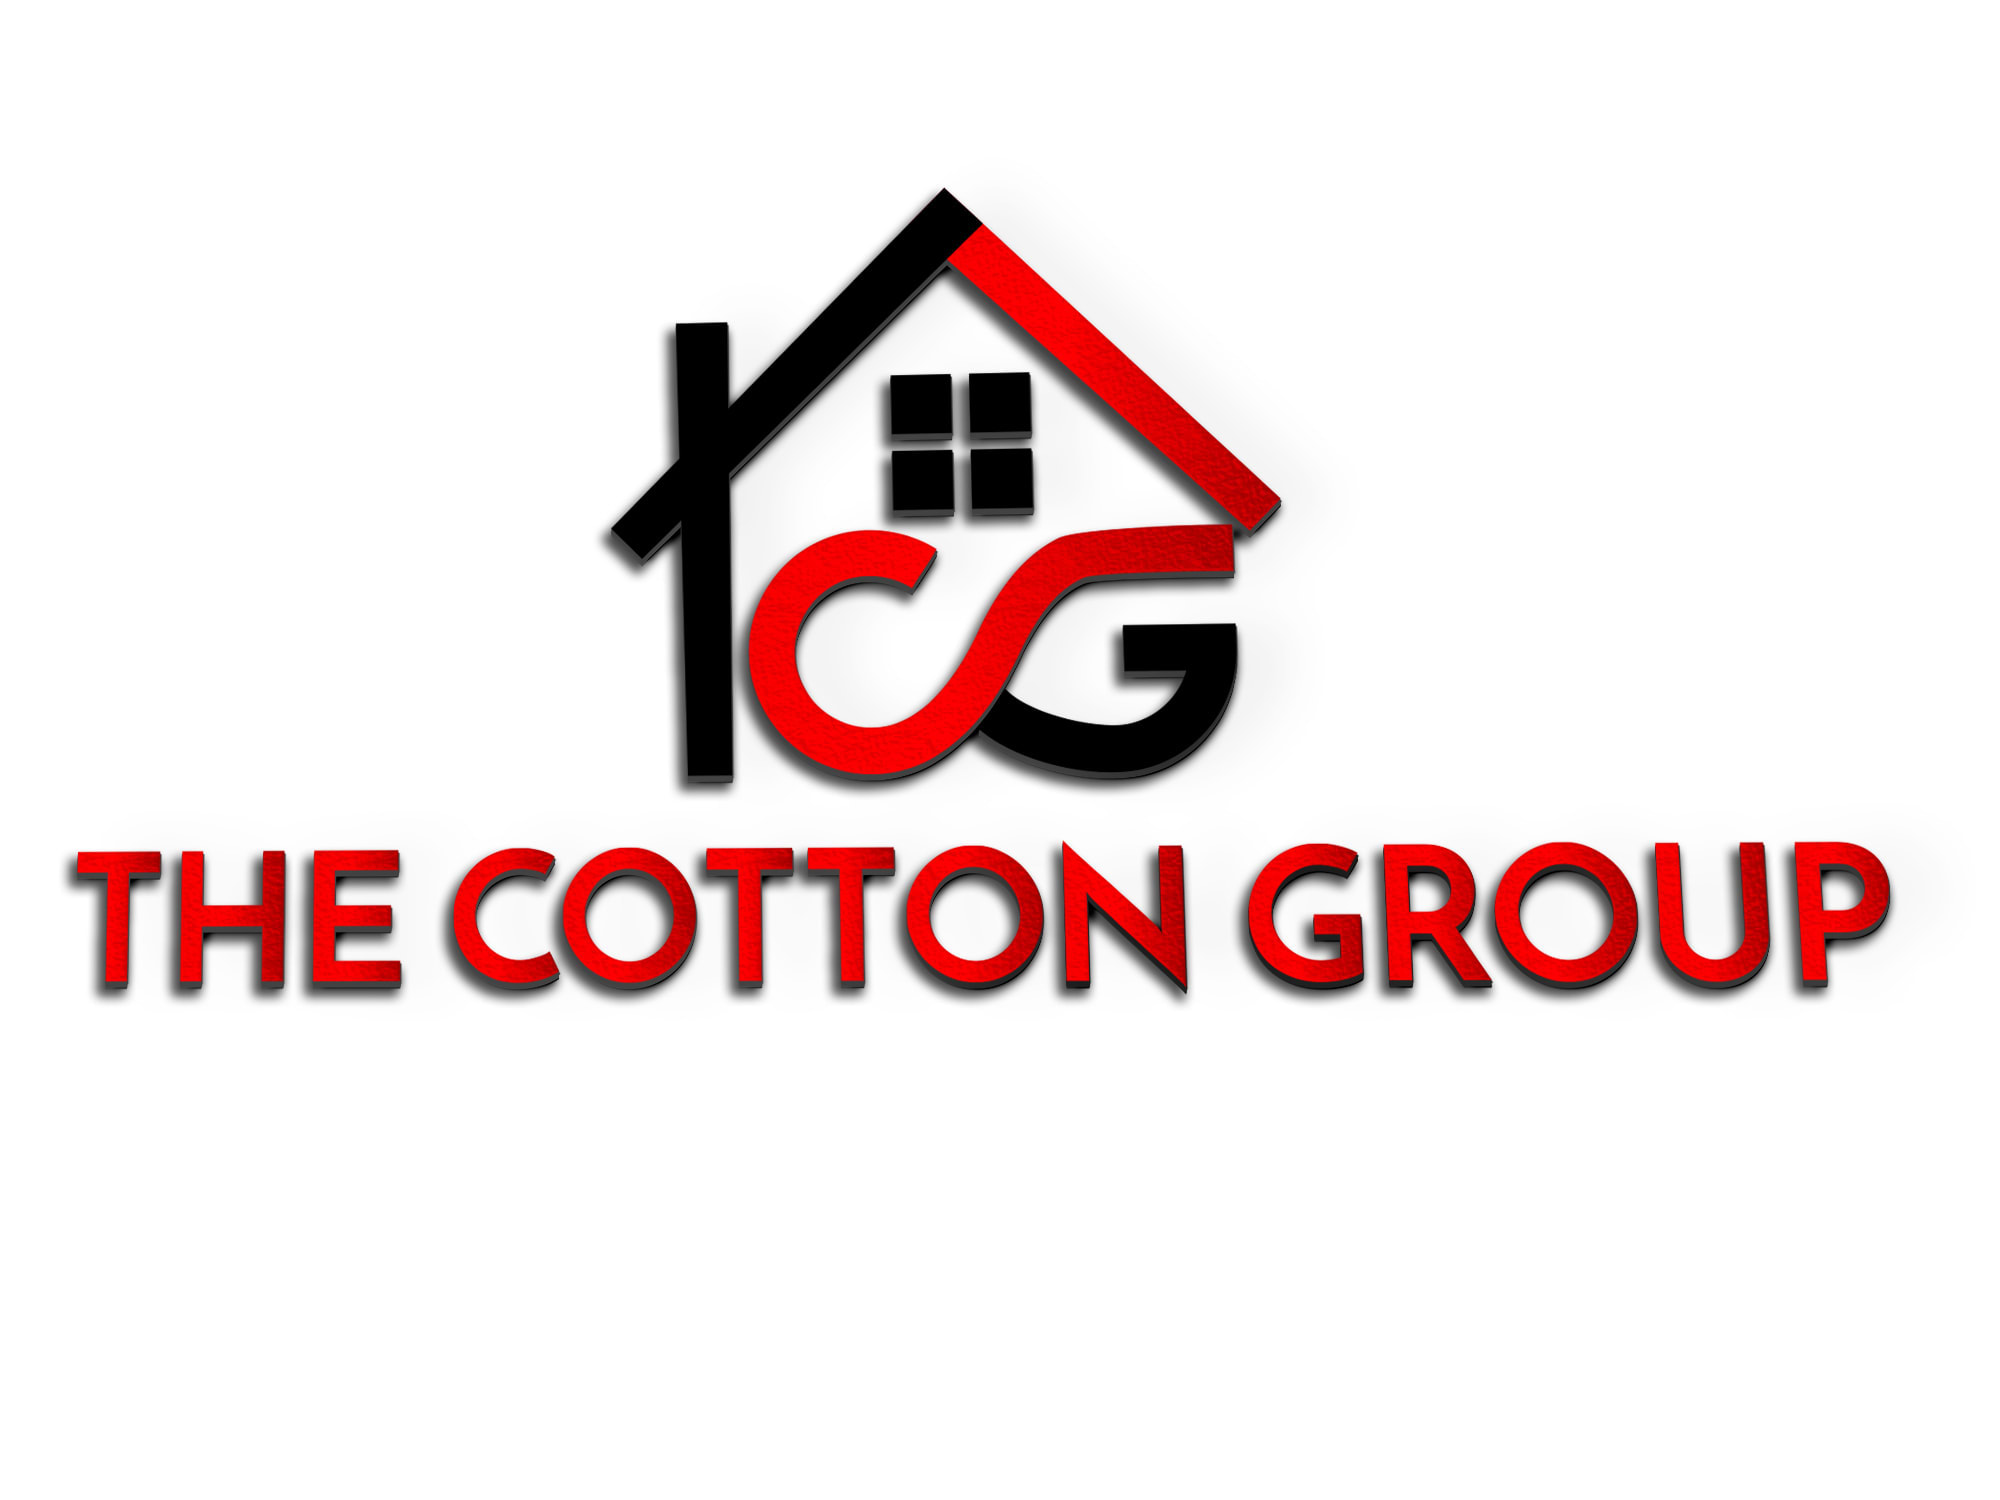 The Cotton Group